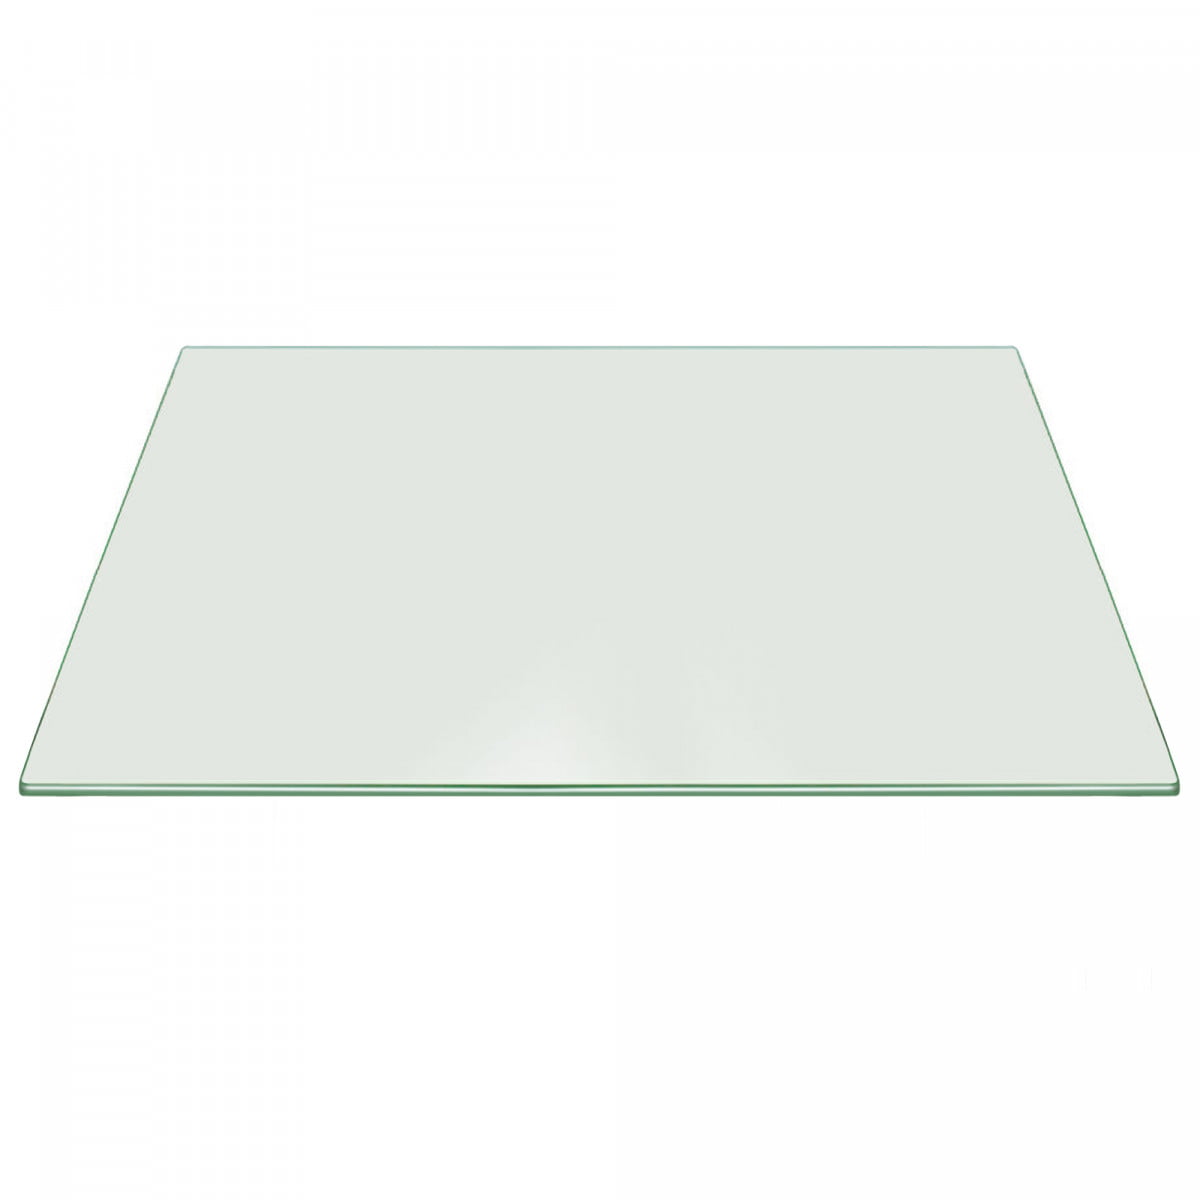 24" Inch Square Tempered Glass Table Top 3/8" thick Pencil edge with 3/8" 